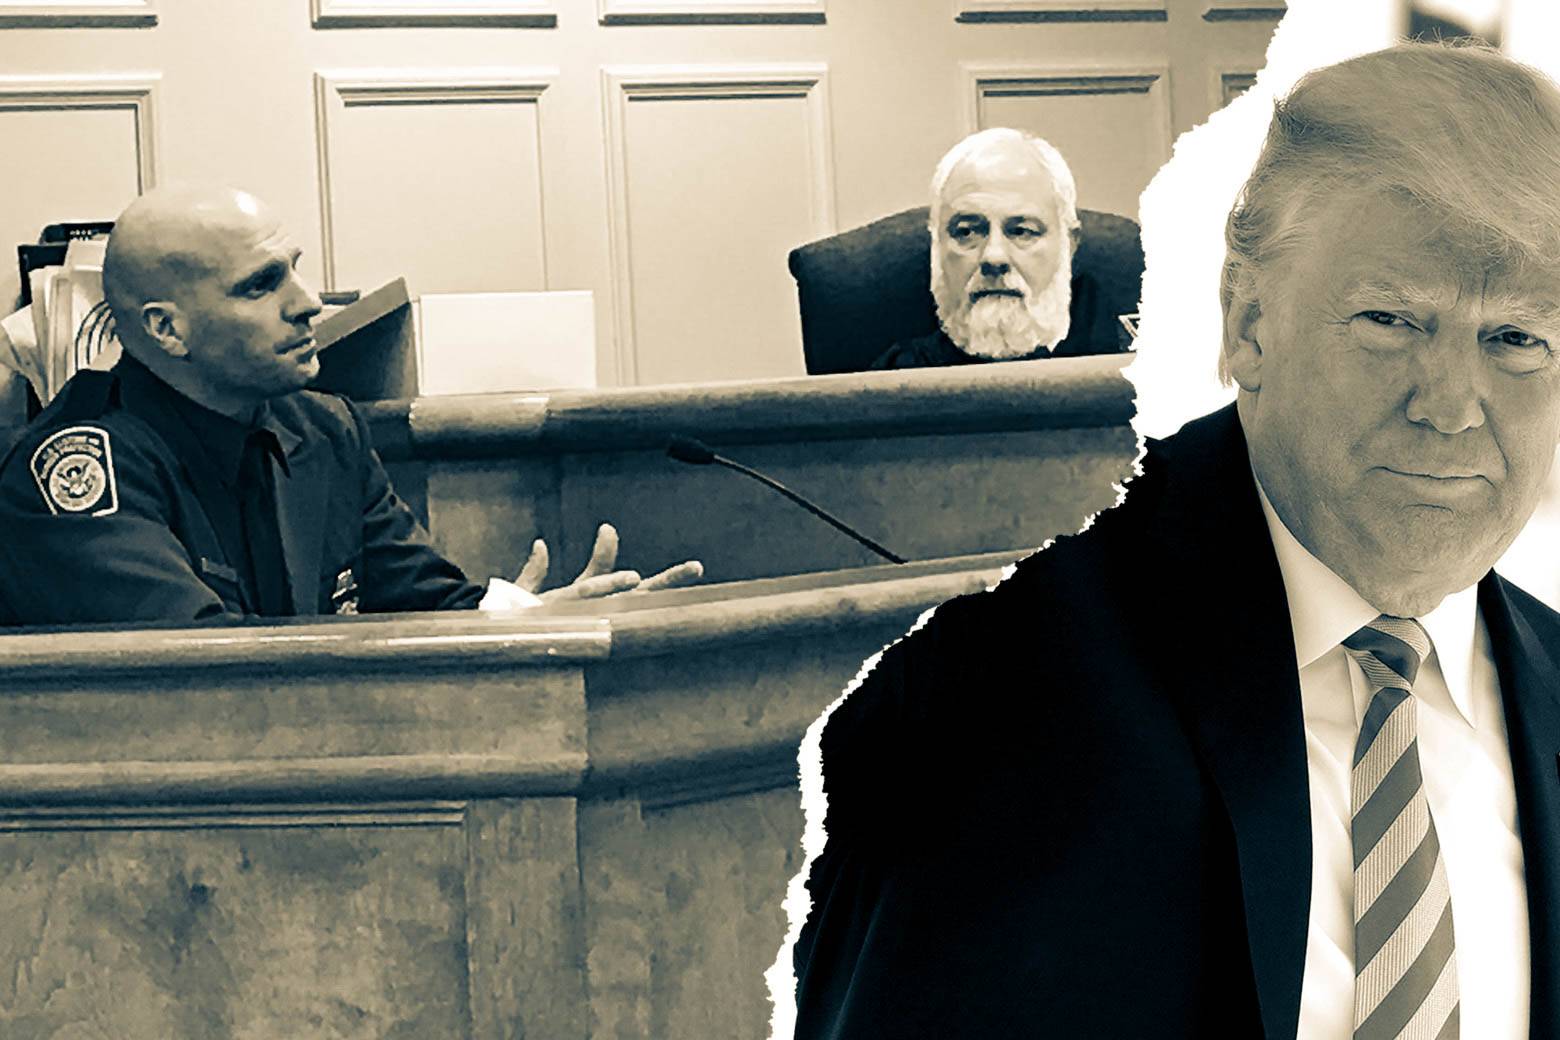 A photo collage, featuring an image of Judge Thomas Rappa and a CBP agent in a courtroom, and a photo of Donald Trump.